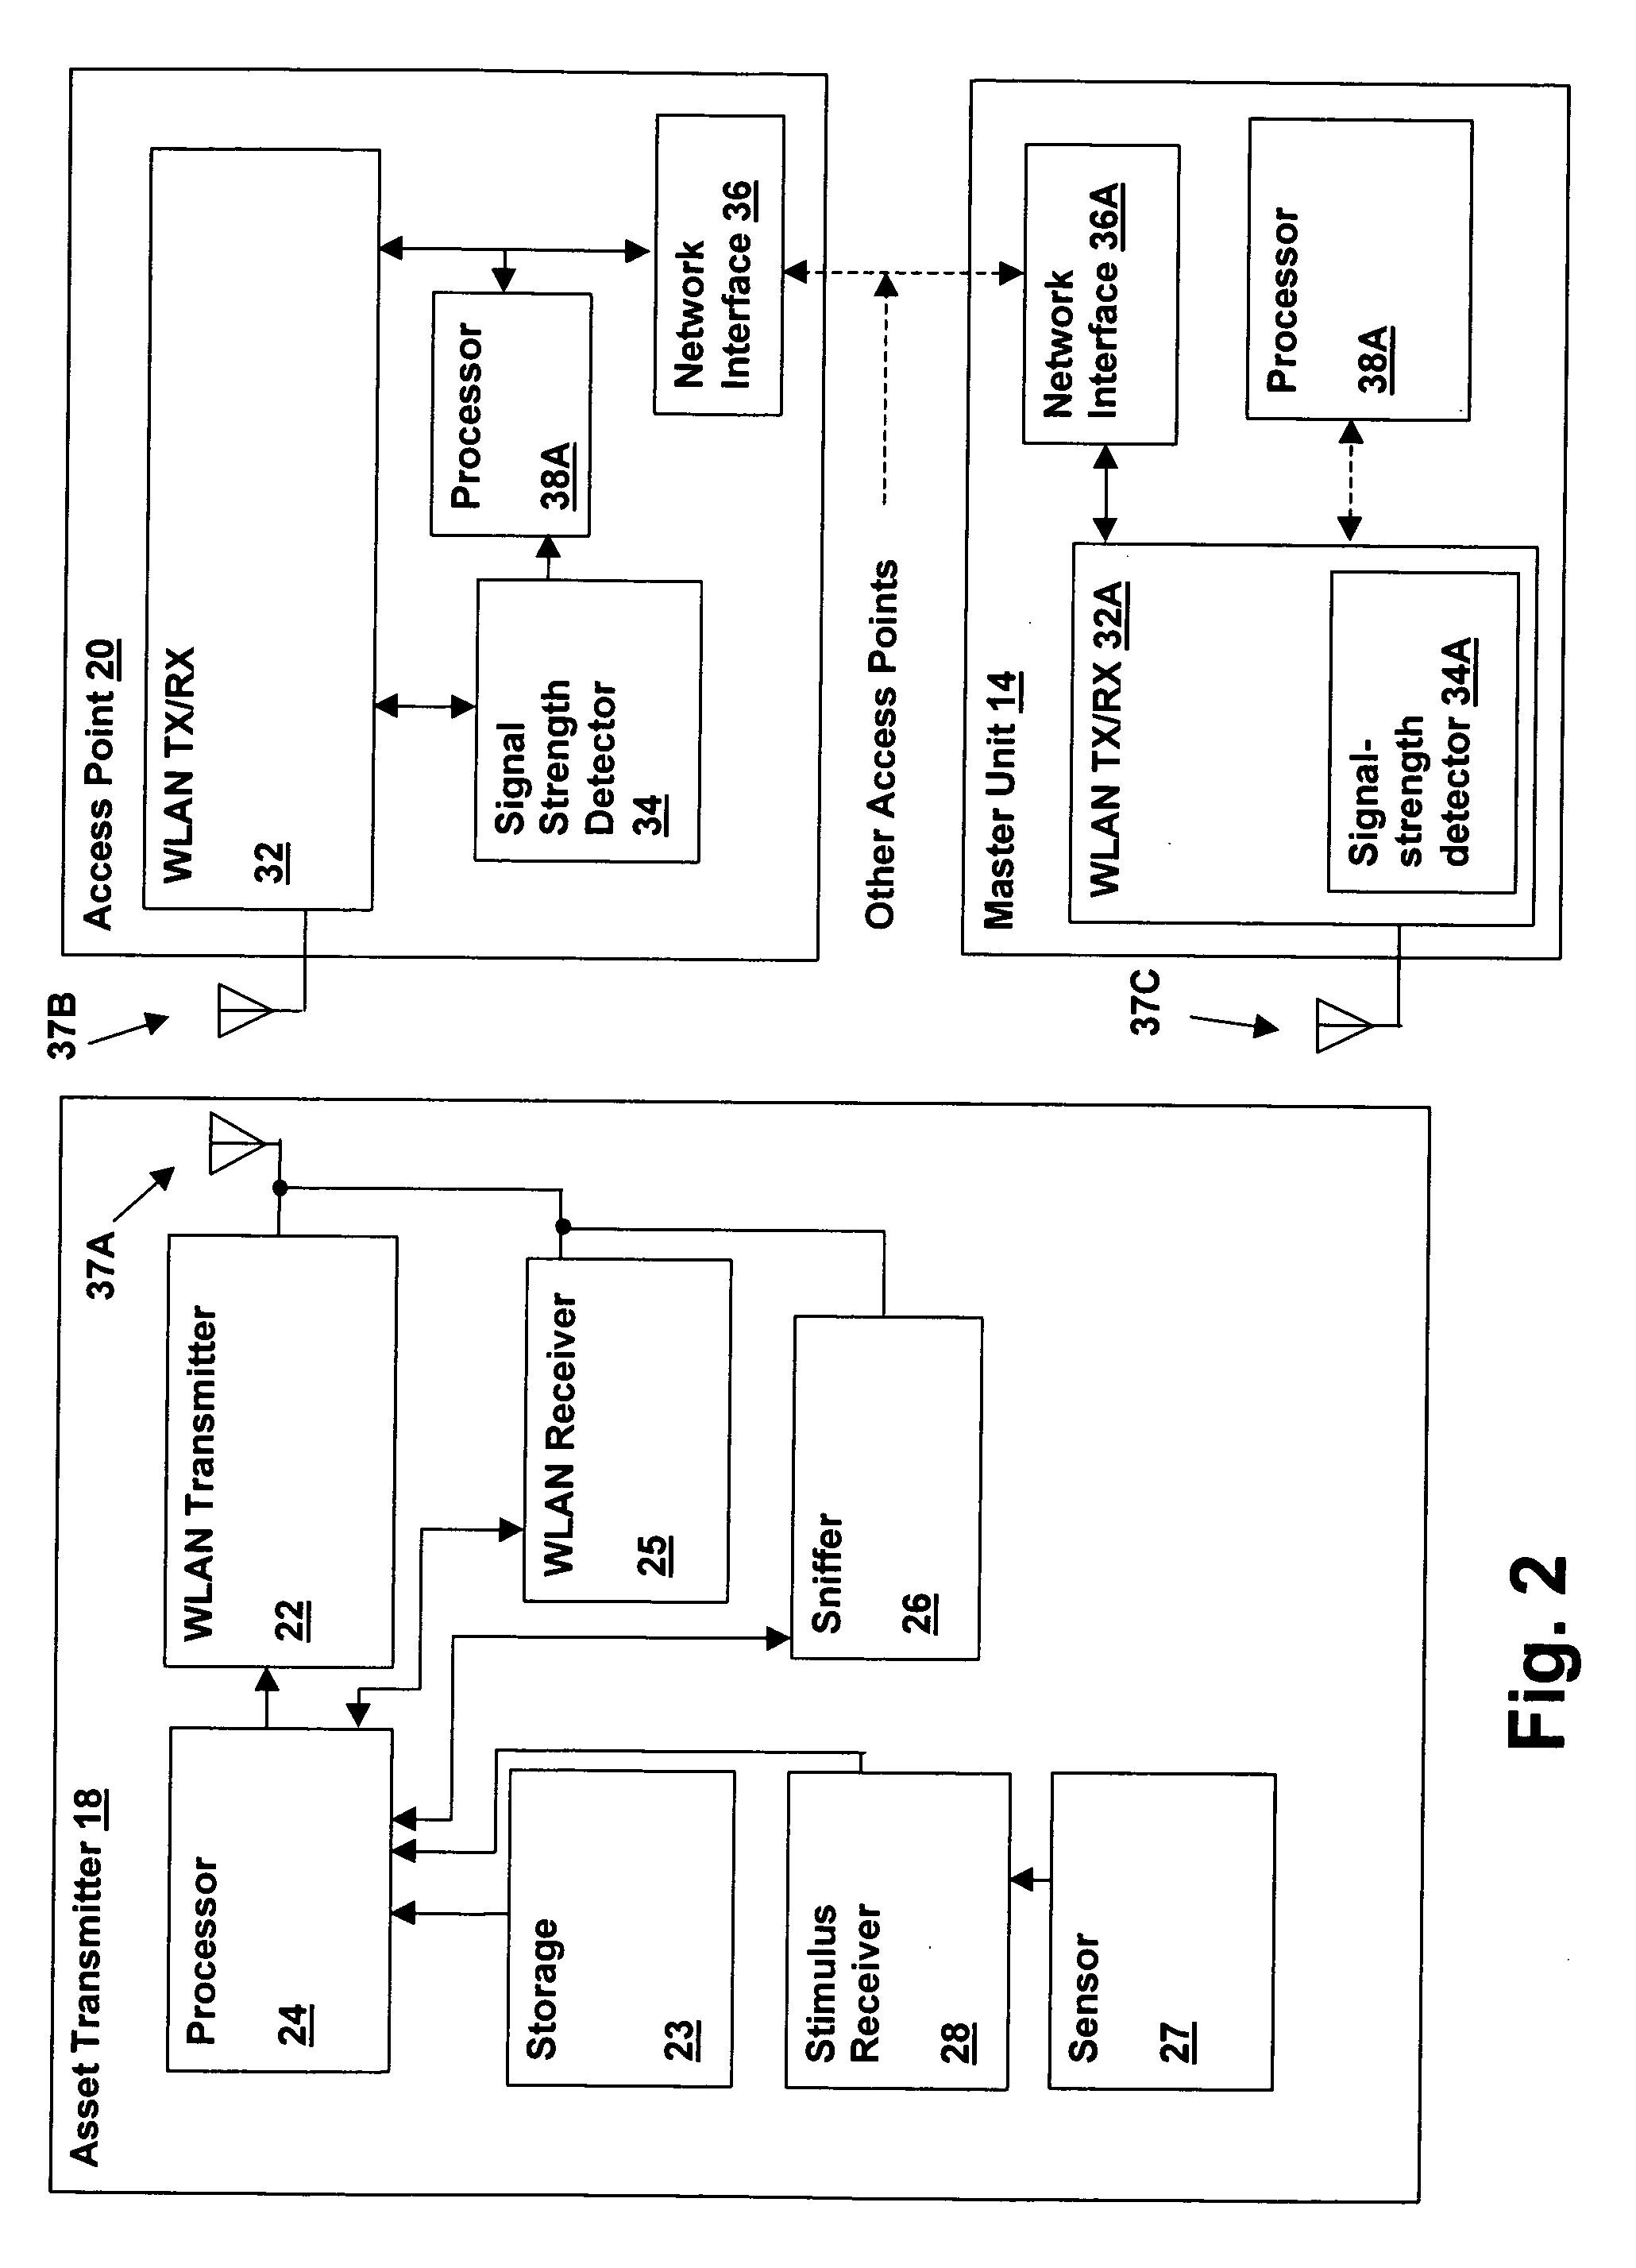 Wireless local area network (WLAN) method and system for presence detection and location finding